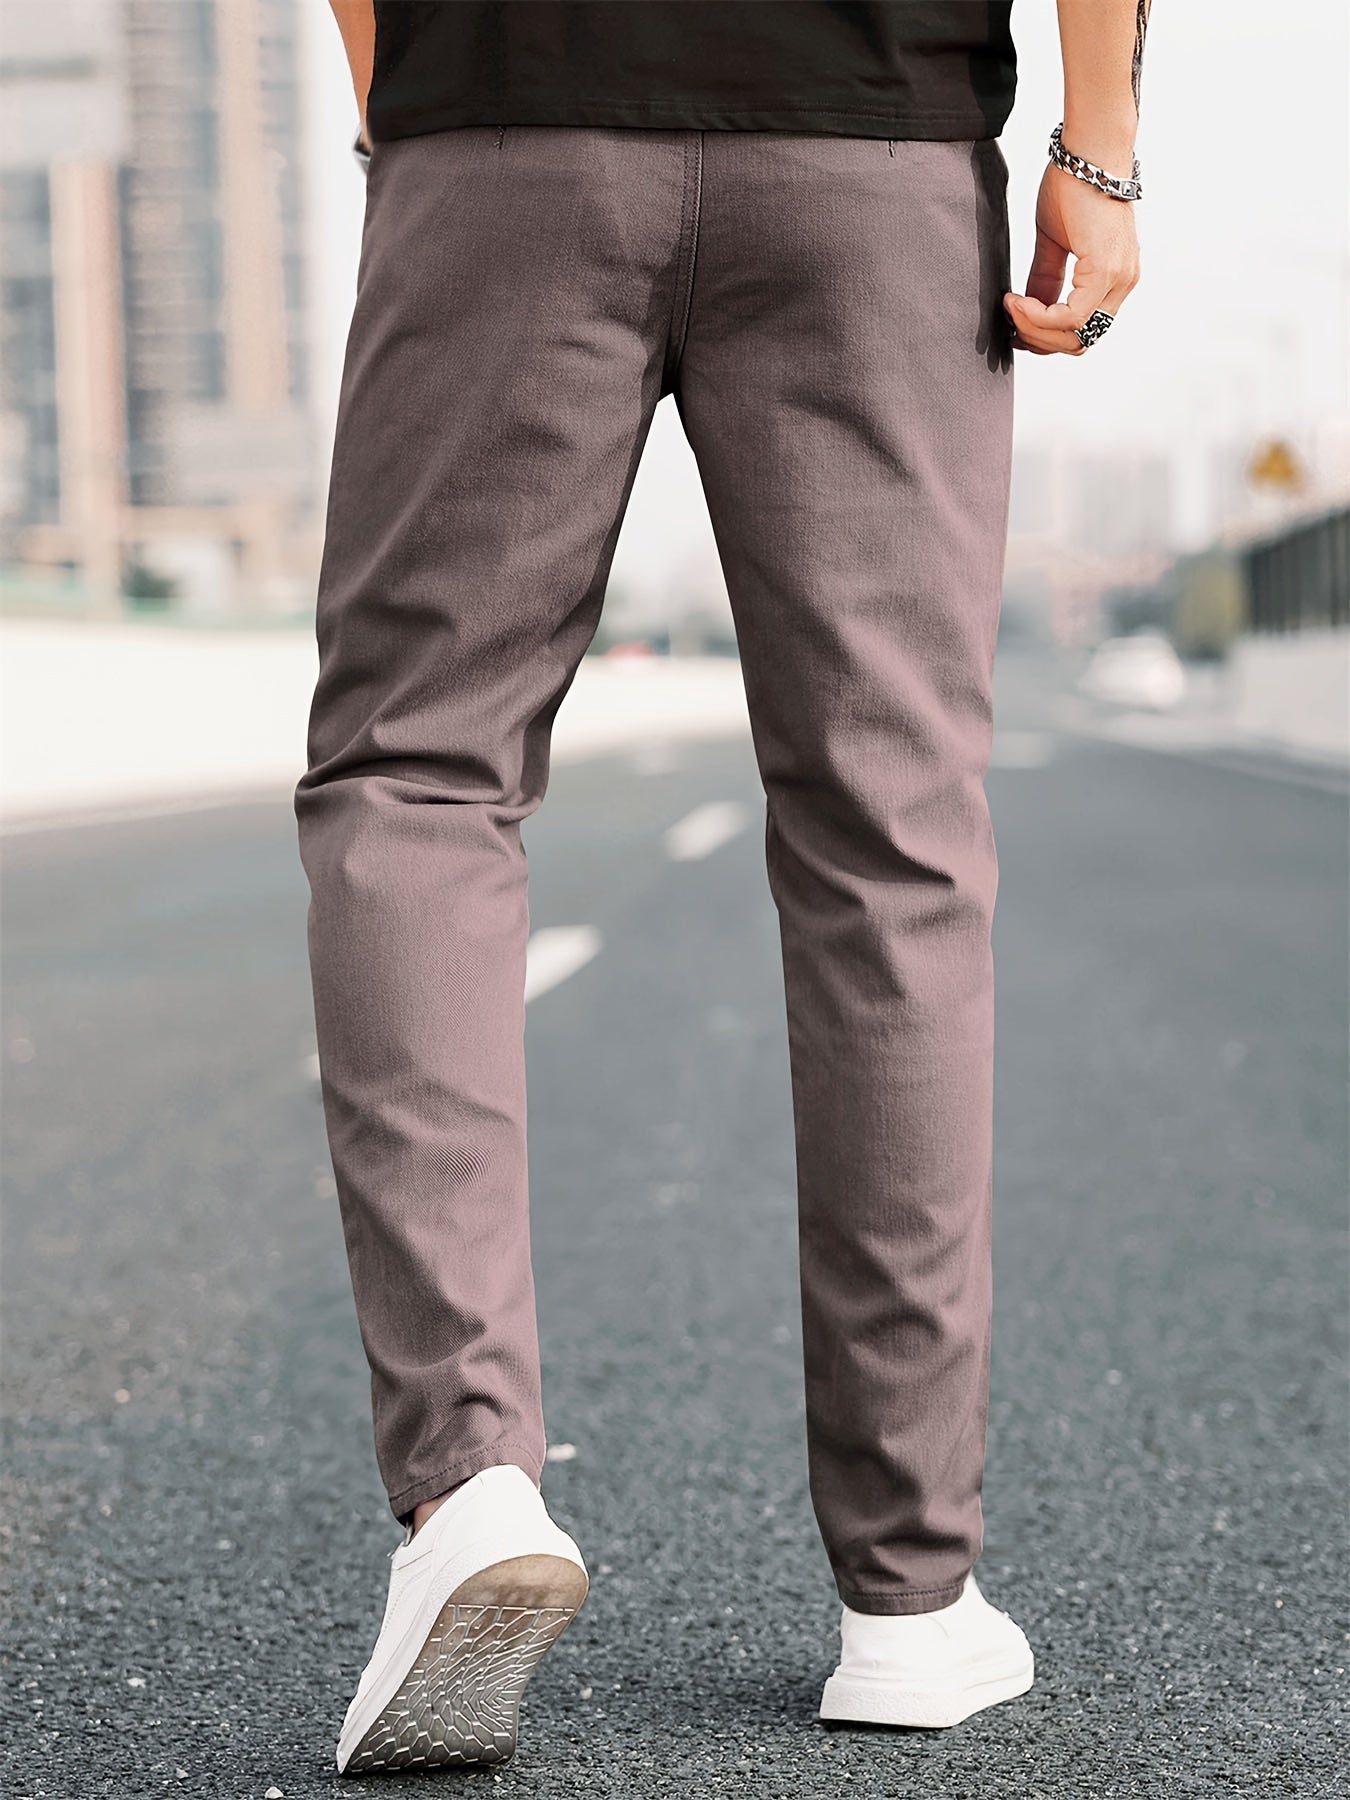 Men's Casual Tapered Trousers Solid Casual Long Cropped Pants Streetwear For Men